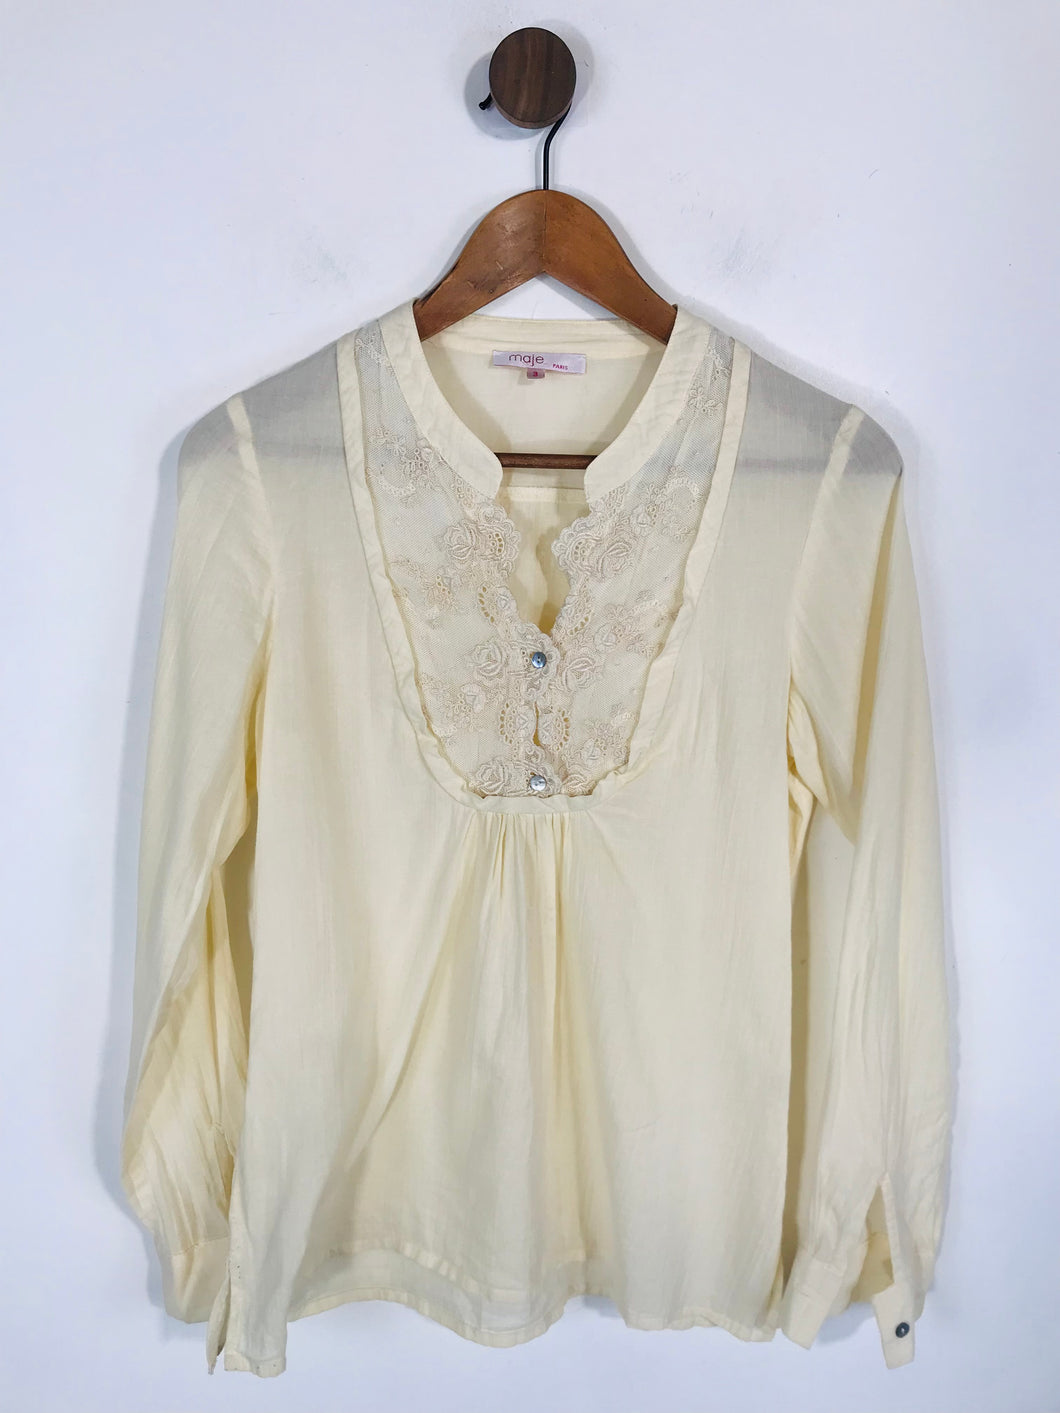 Maje Women's Embroidered Blouse | T3 UK12 | Beige